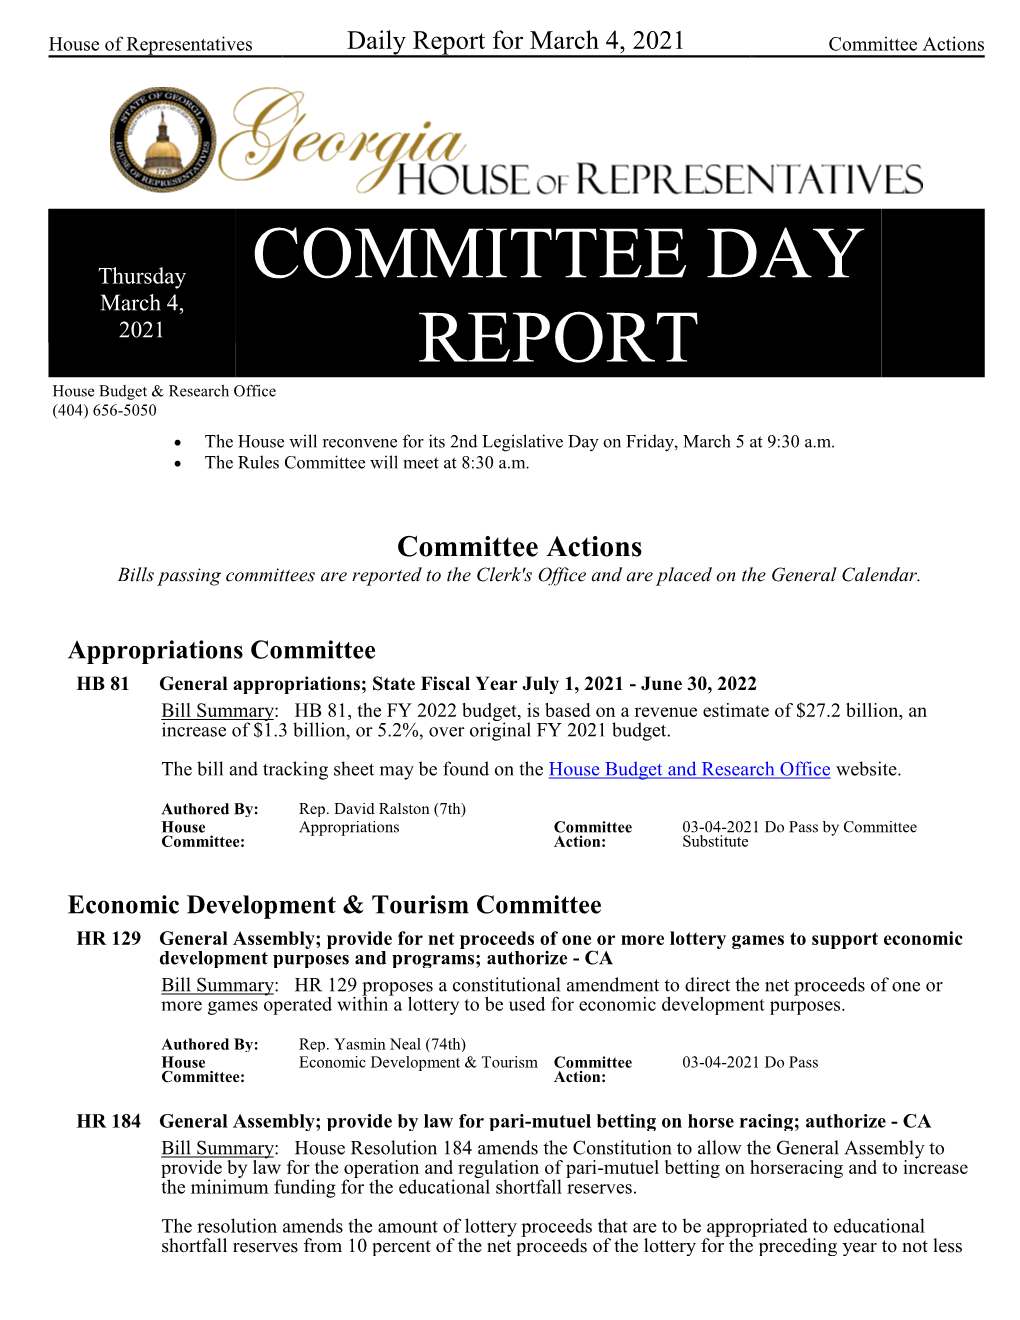 Committee Day Report